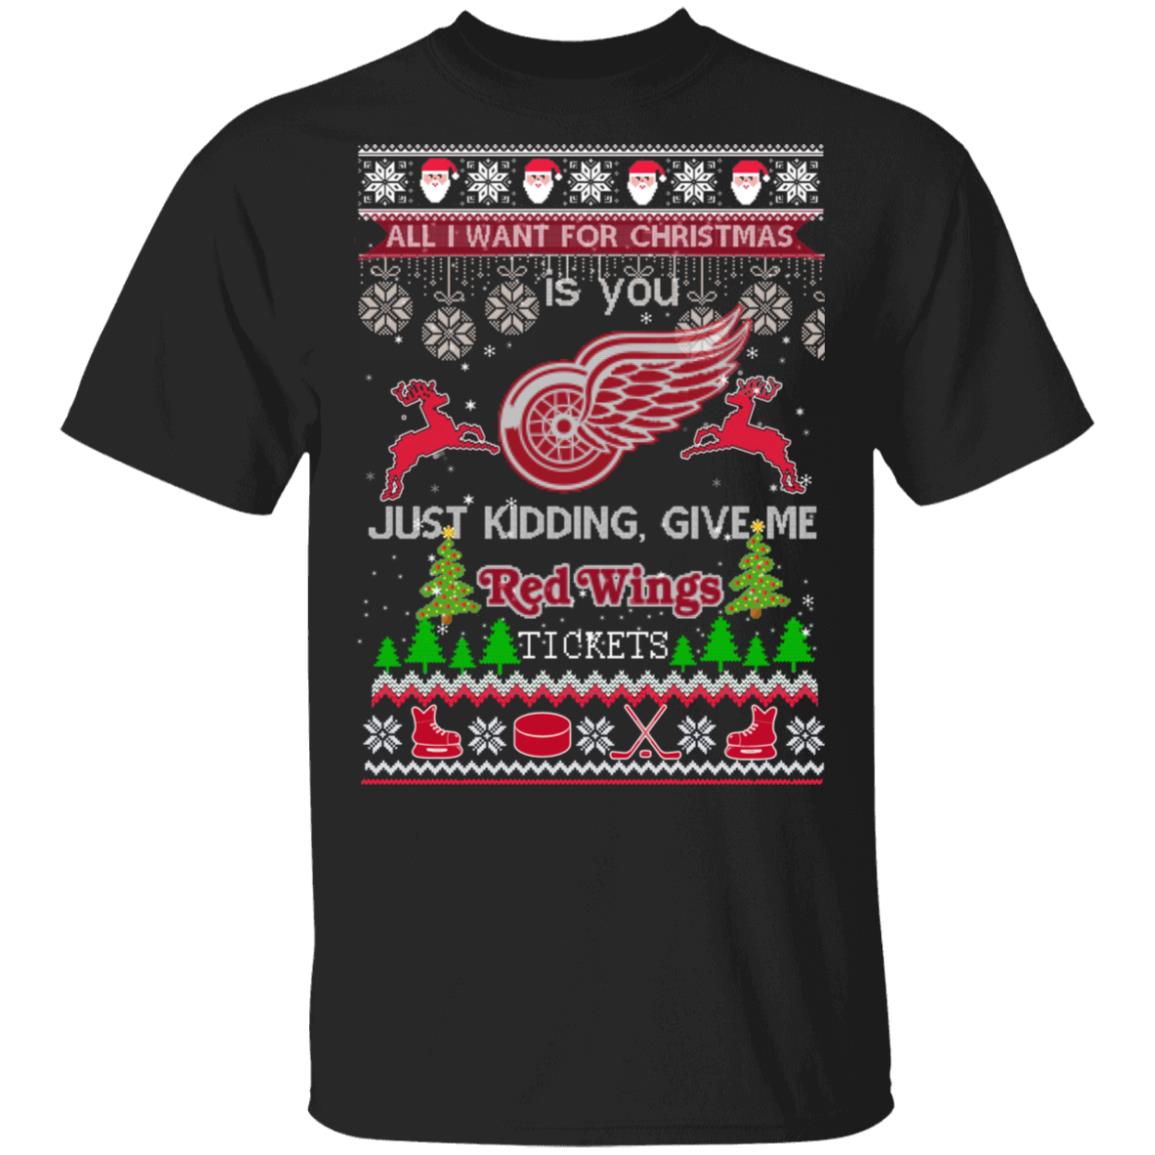 WingsNation on X: WINGS NATION HOLIDAY GIVEAWAY! I've got one of these #RedWings  ugly sweater t-shirts from Dec 15th's game at LCA to giveaway! Follow and  RT to enter. A winner will